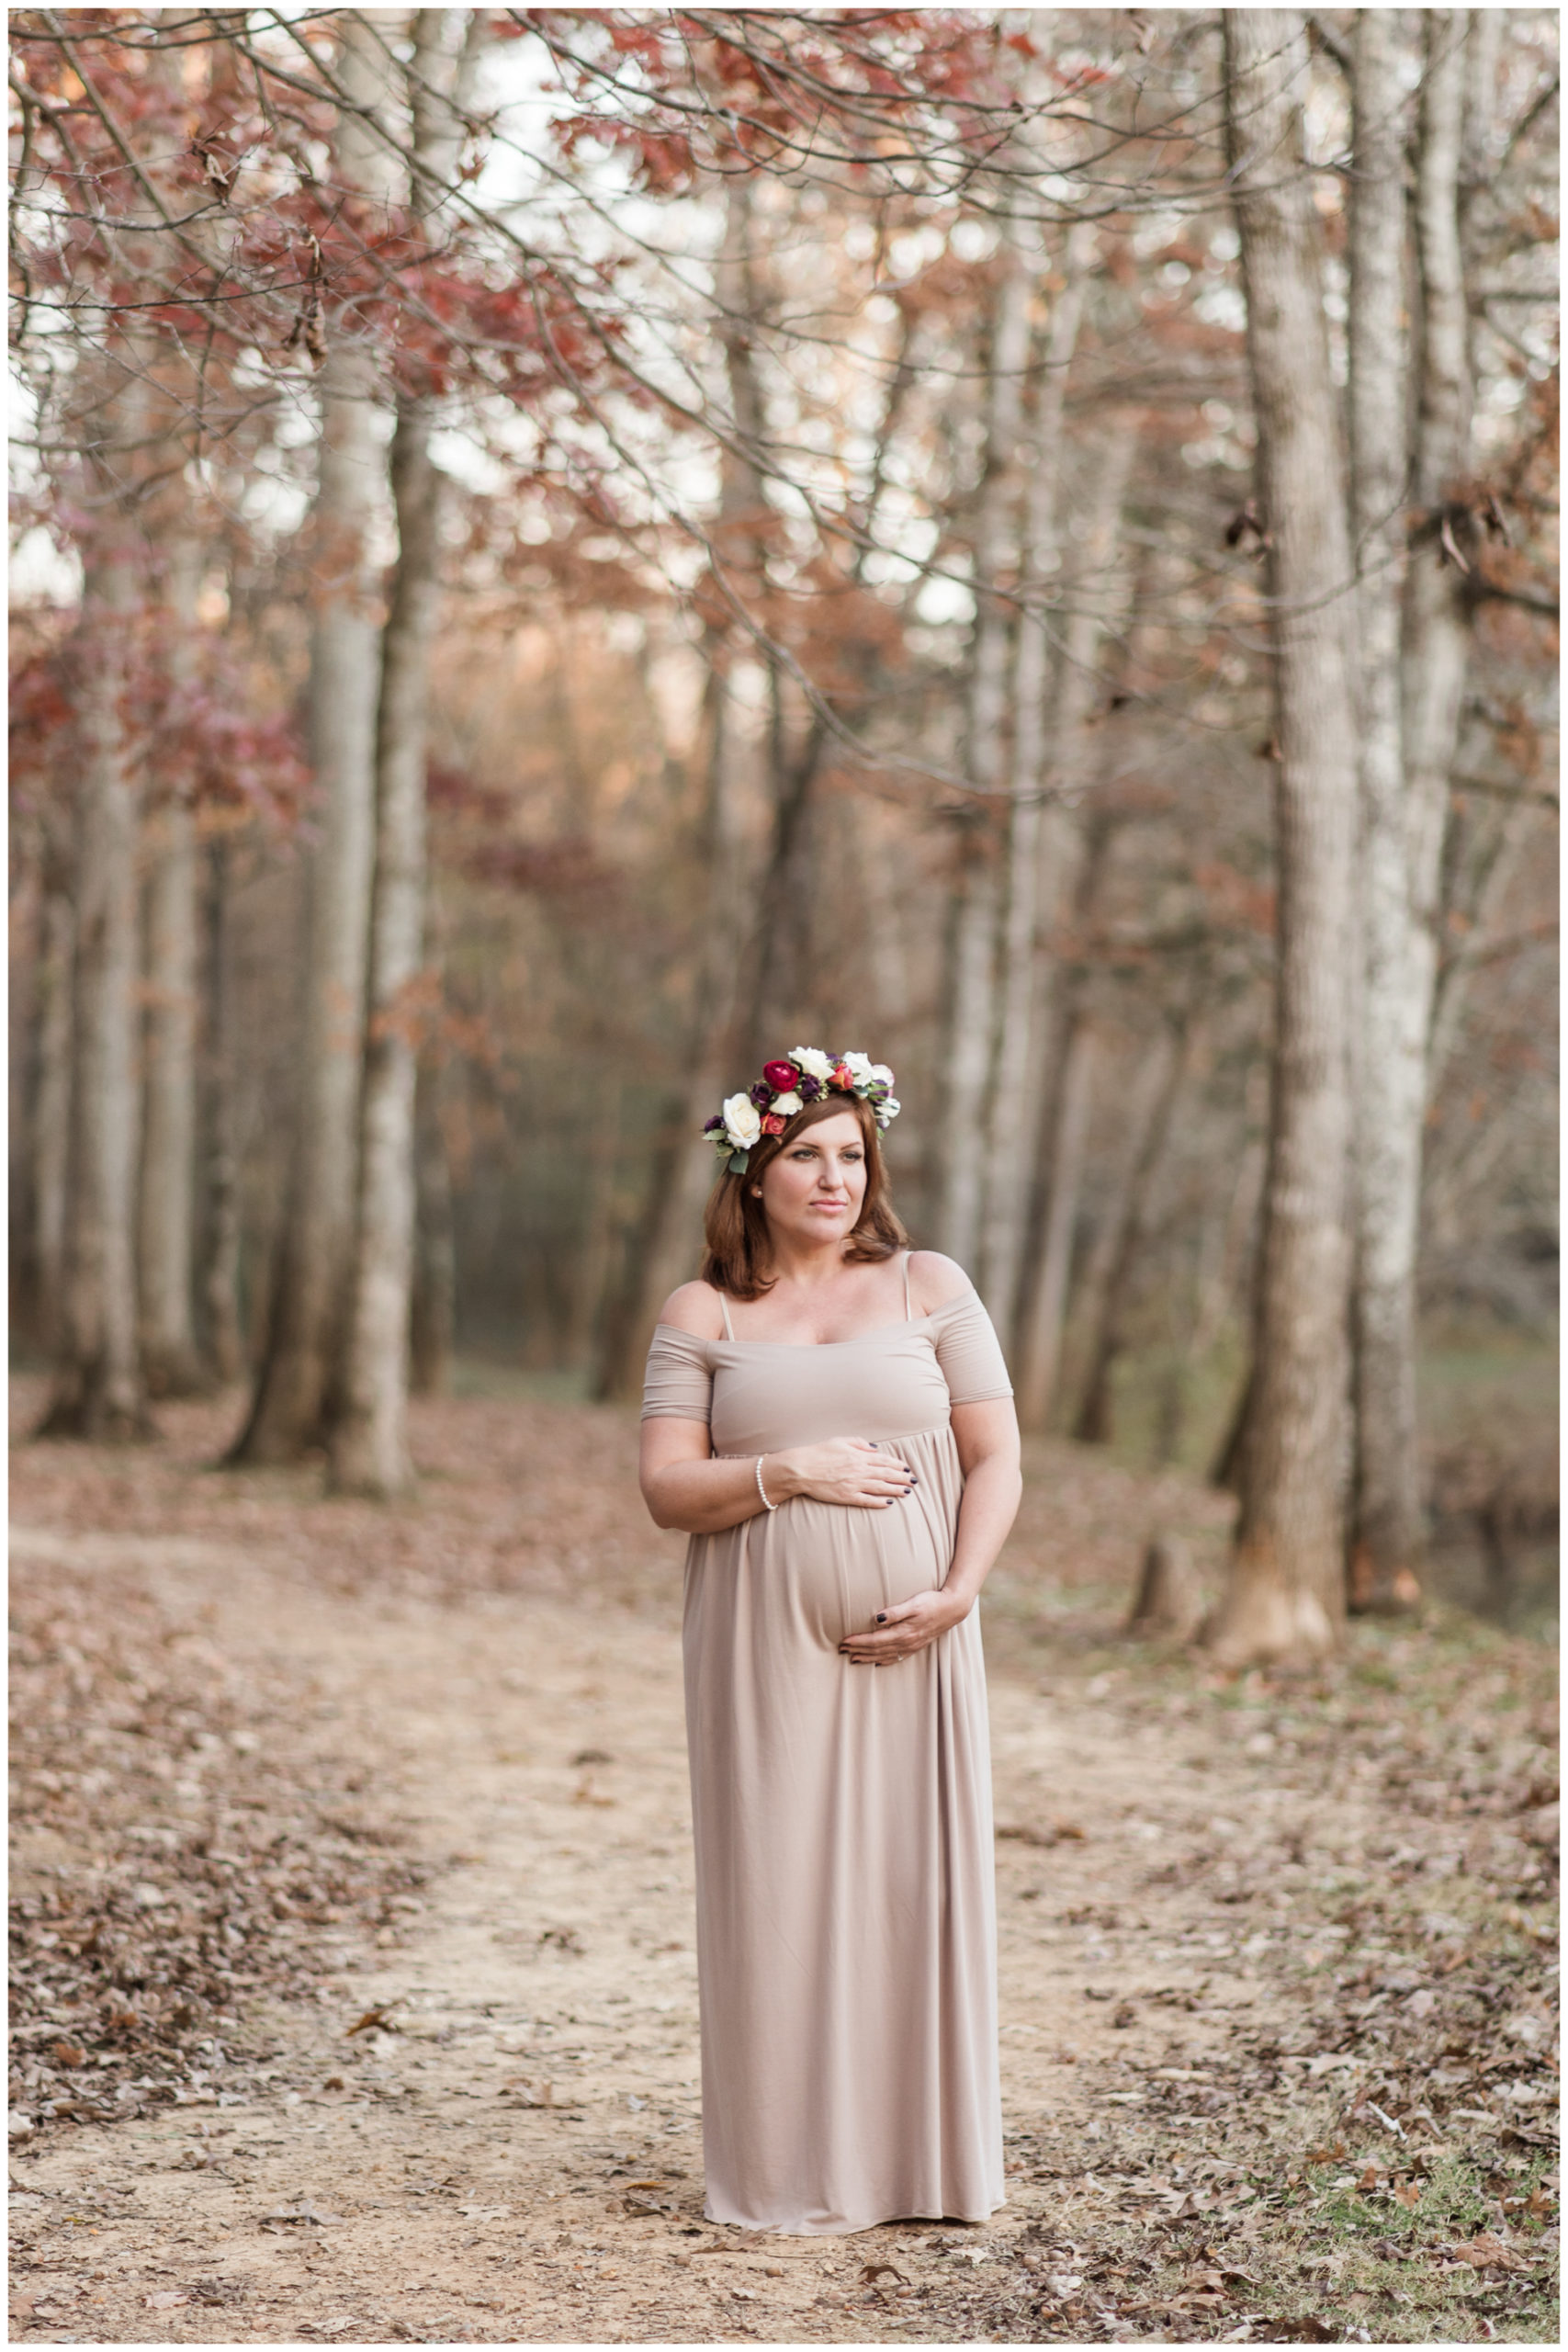 Hays Nature Preserve - Fall Maternity Session - Huntsville Family Photographer - Glowing Momma with flower crown